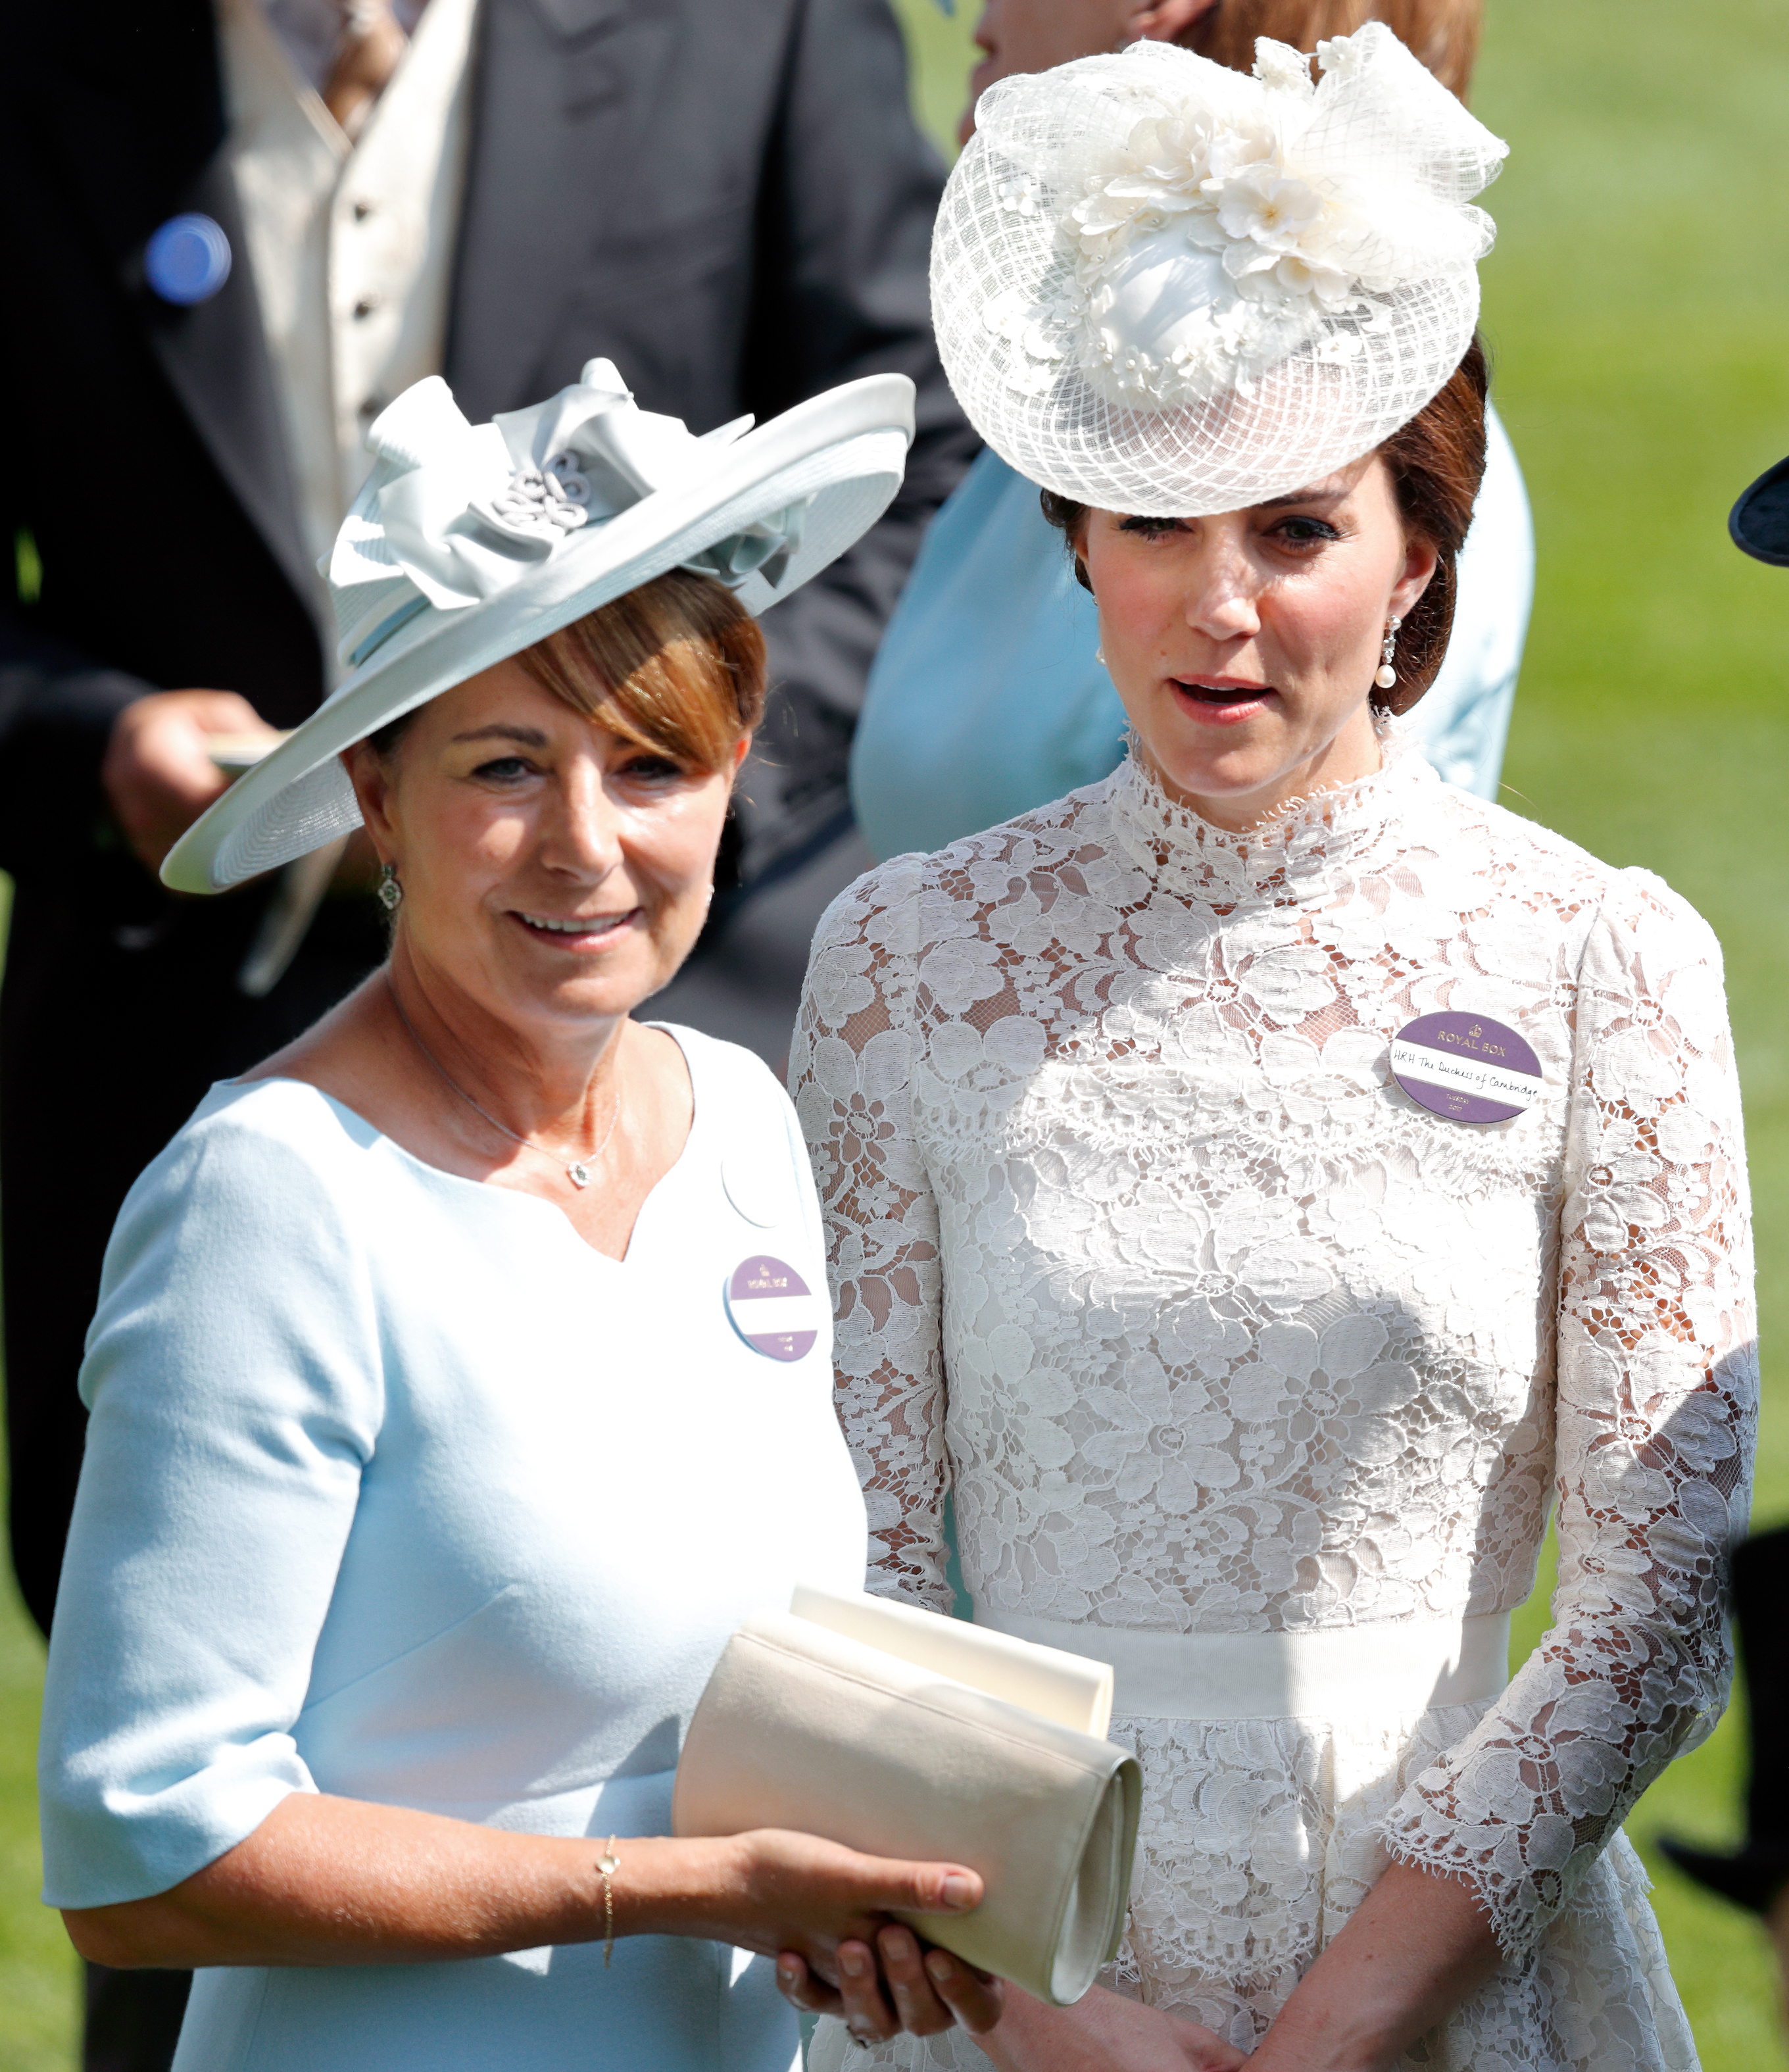 Carole Middleton and Catherine, Duchess of Cambridge attend day 1 of Royal Ascot at Ascot Racecourse in England, on June 20, 2017. | Source: Getty Images